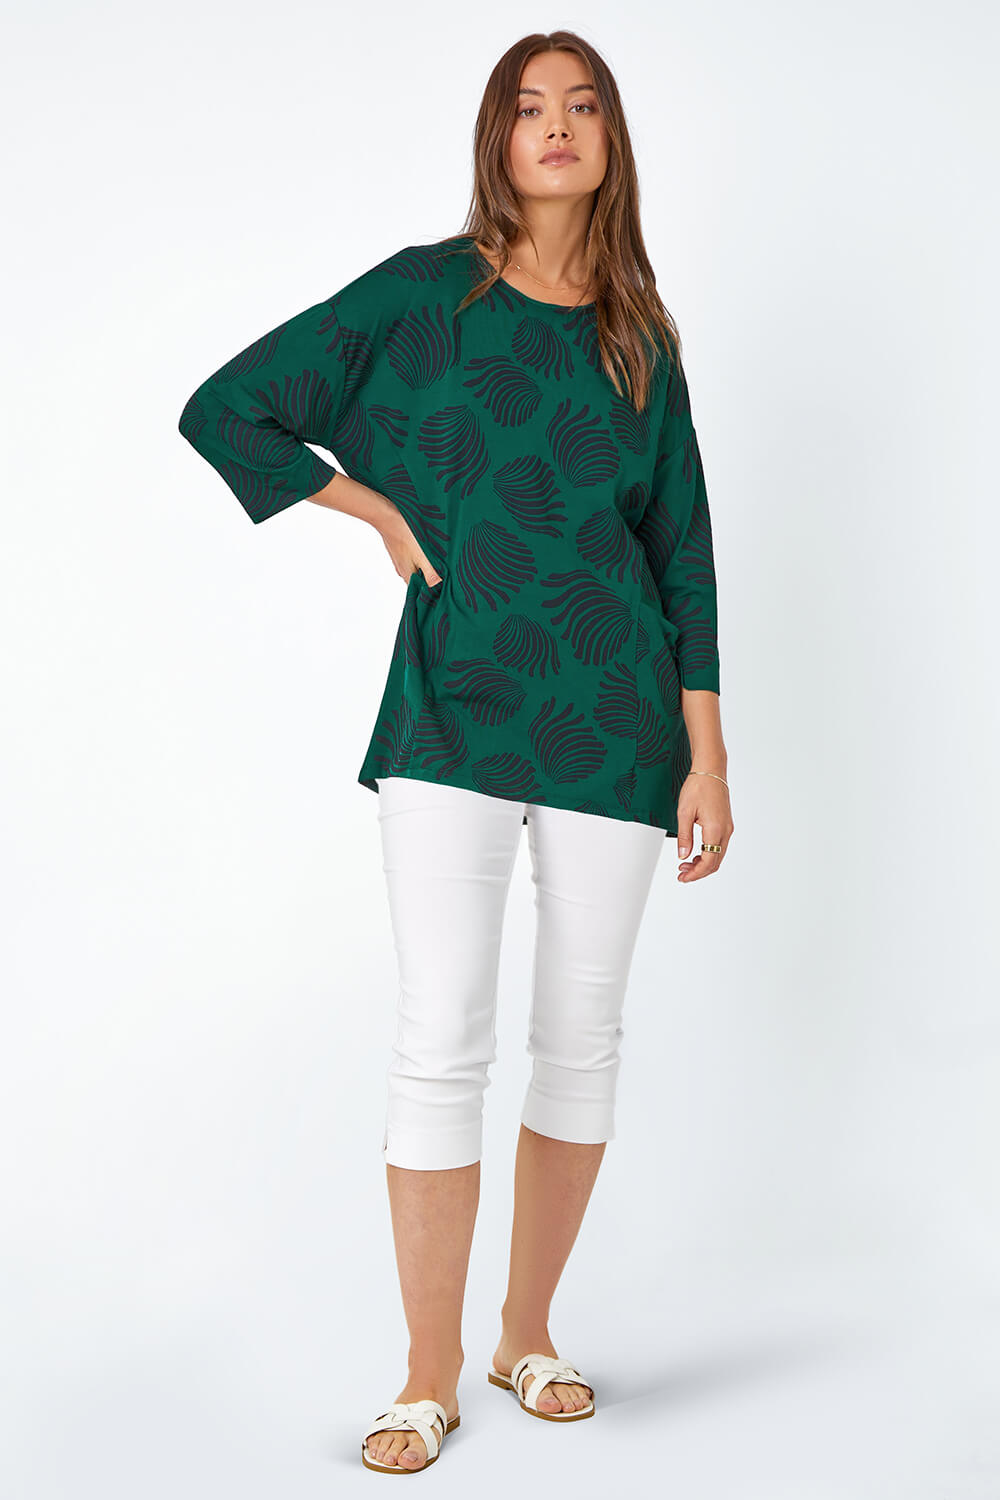 Green Abstract Print Pocket Tunic Stretch Top, Image 2 of 5